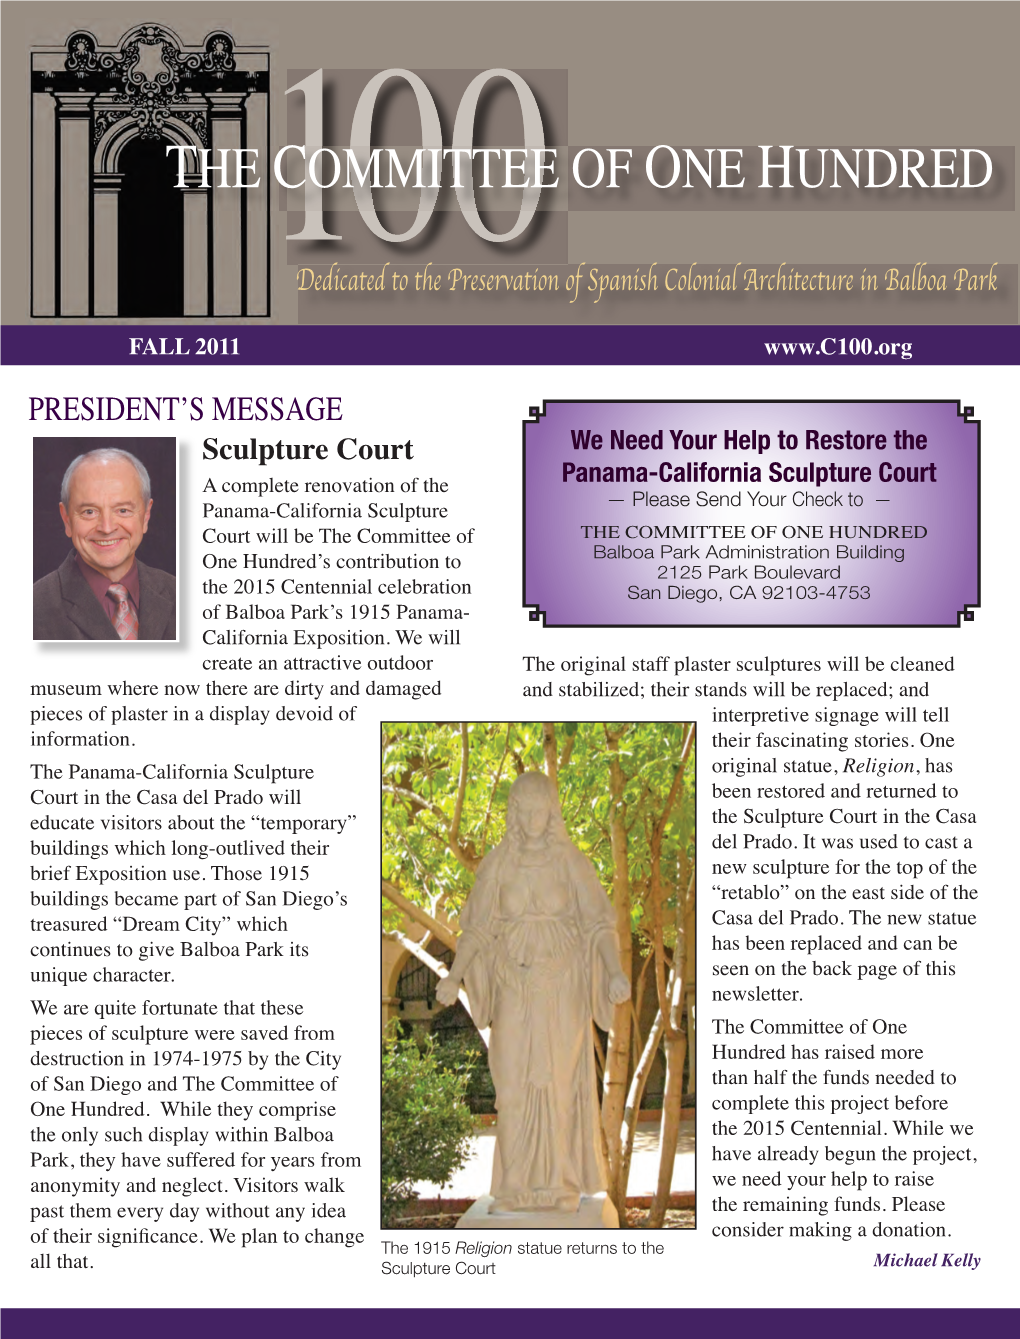 The Committee of One Hundred Newsletter, Fall 2011